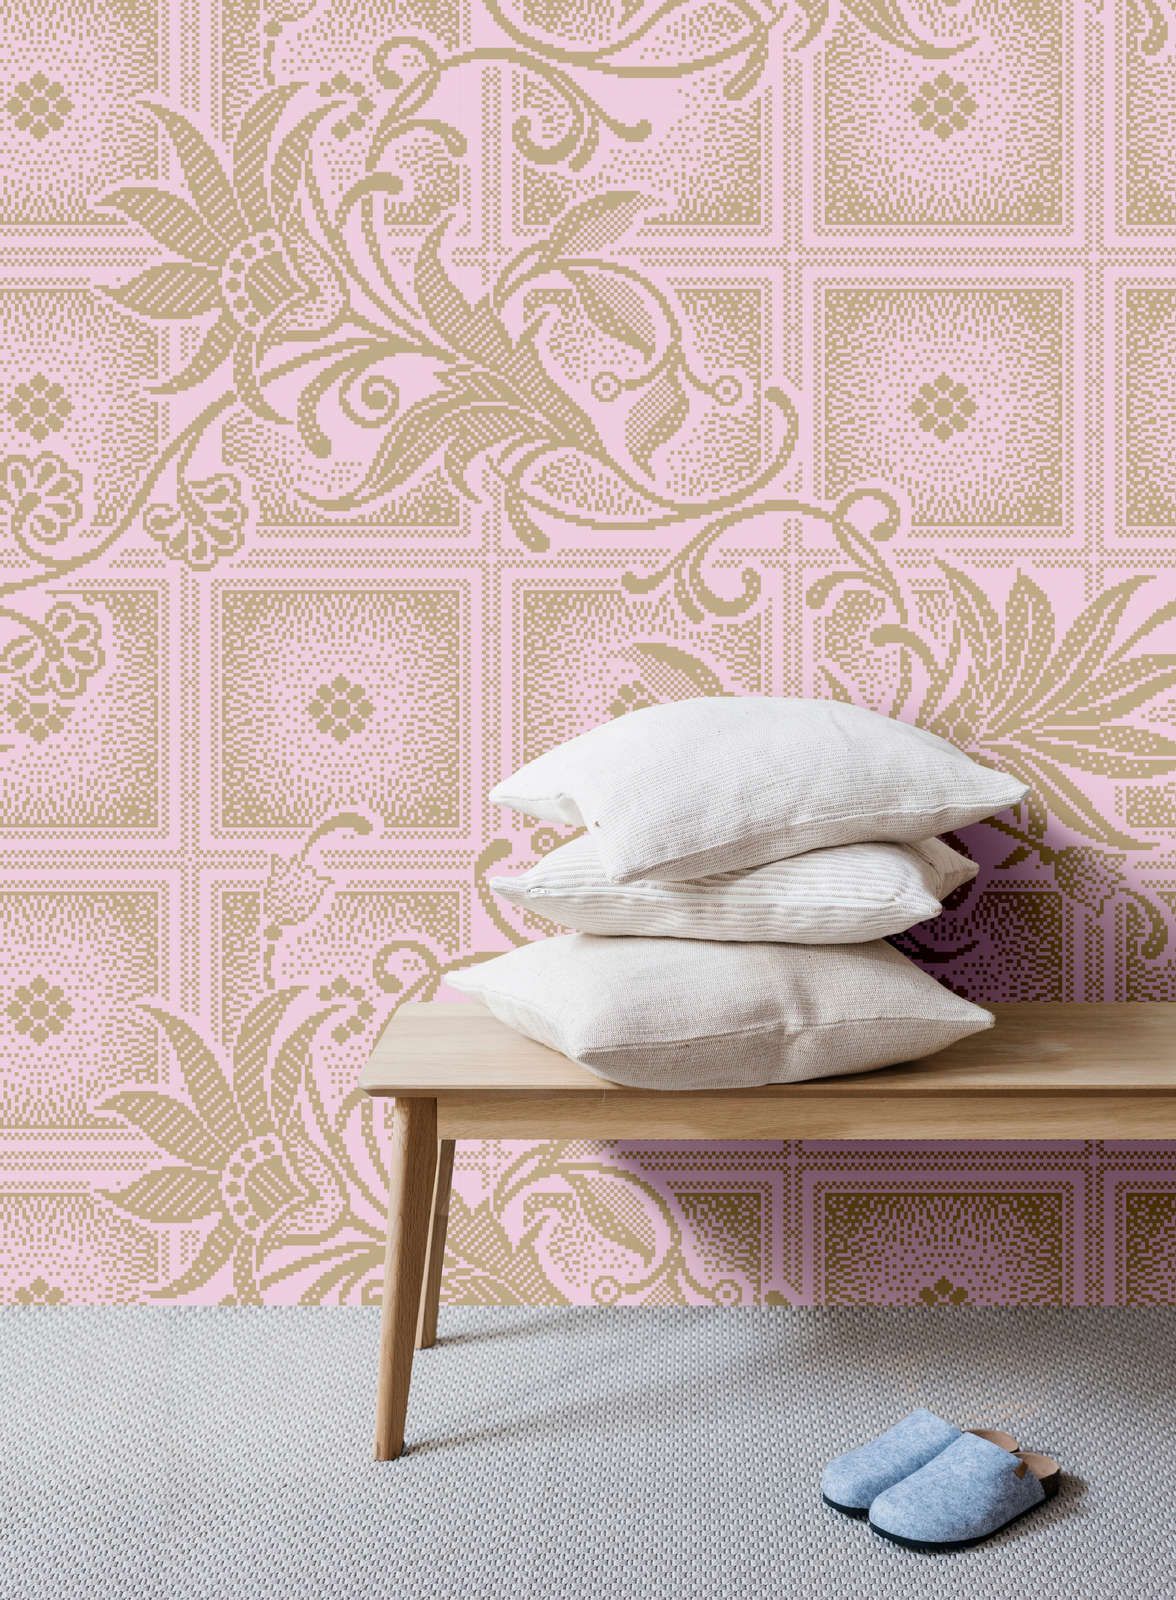             Photo wallpaper »vivian« - Pixel style squares with flowers - Pink | Smooth, slightly pearly shimmering non-woven fabric
        